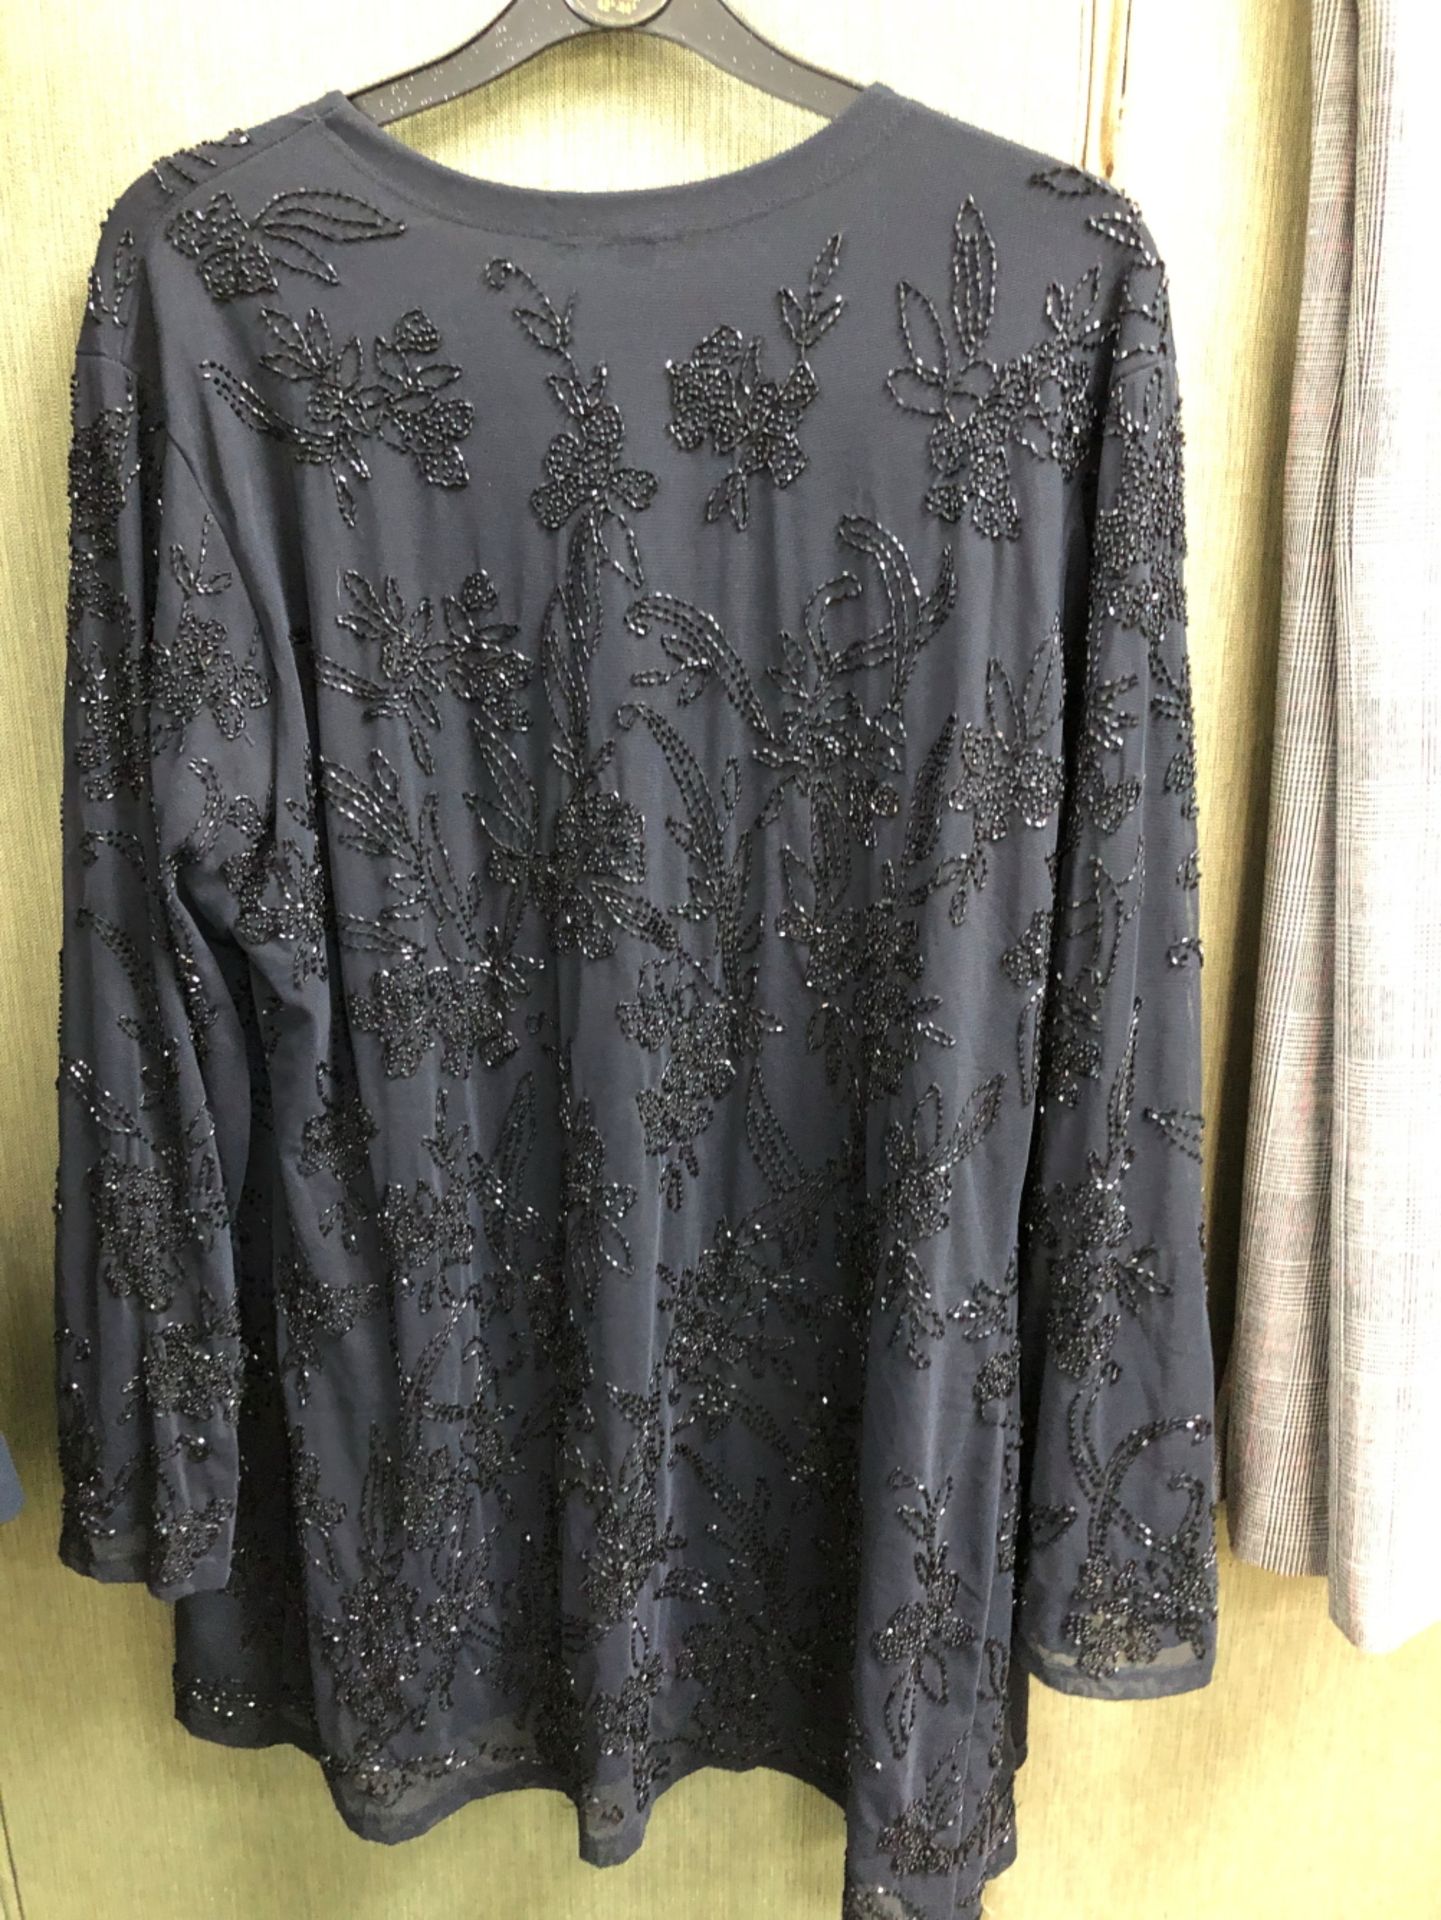 A BLACK SEQUIN EVENING JACKET SIZE XL, TOGETHER WITH JEAN-LOUIS SCHERRER BOUTIQUE NAVY BLUE TOP SIZE - Image 9 of 17